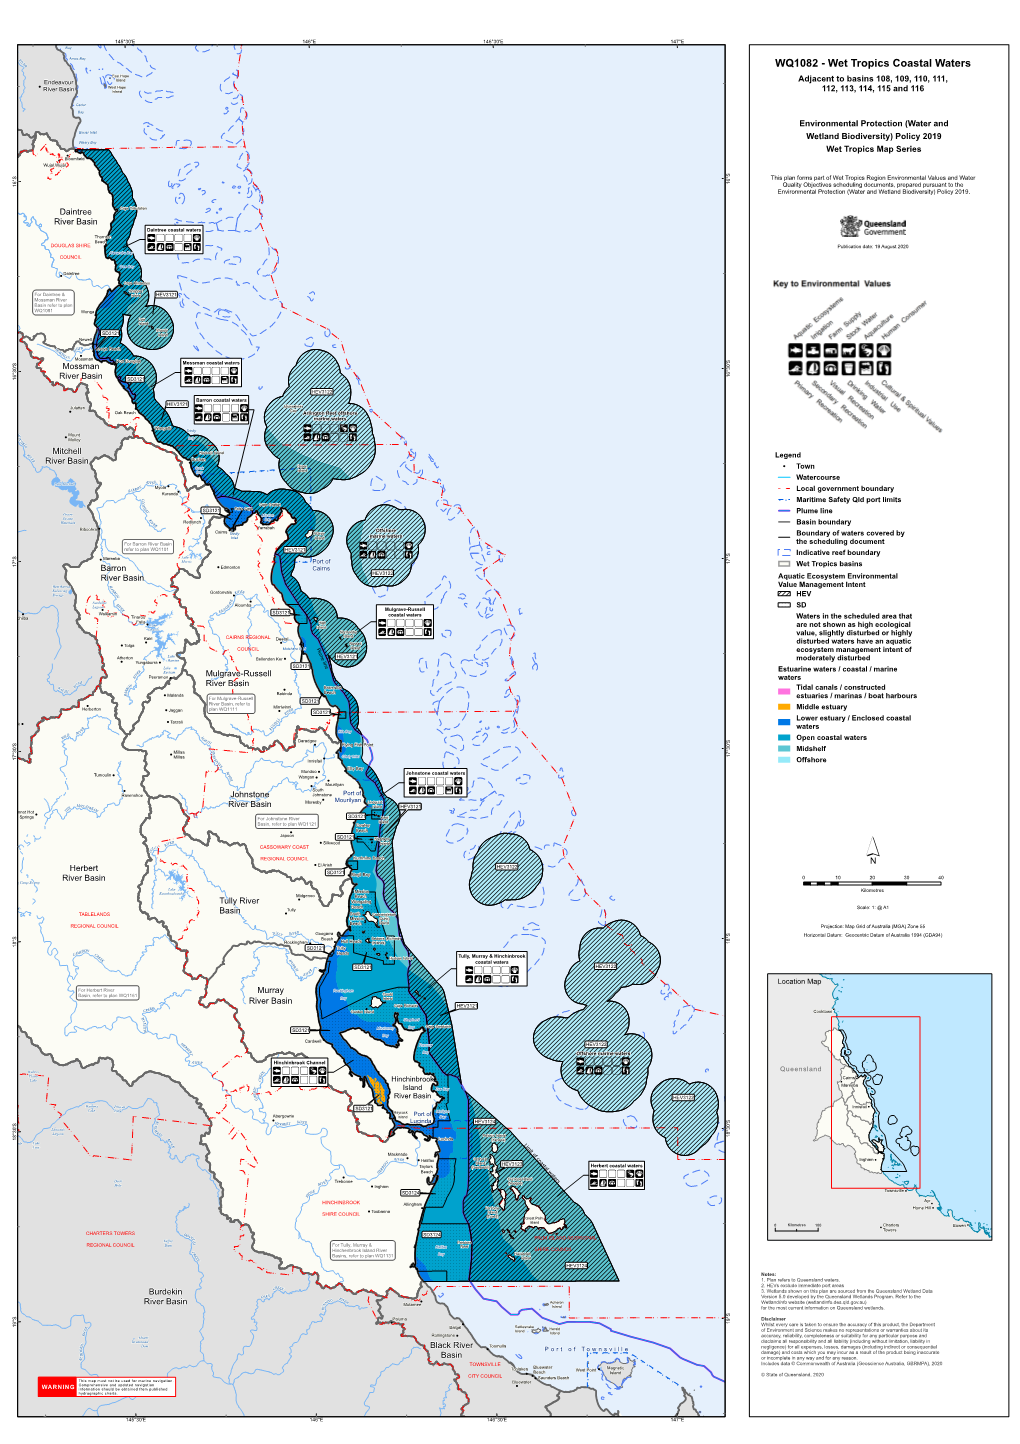 WQ1082 Wet Tropics Coastal Waters Plan for Environmental Values And